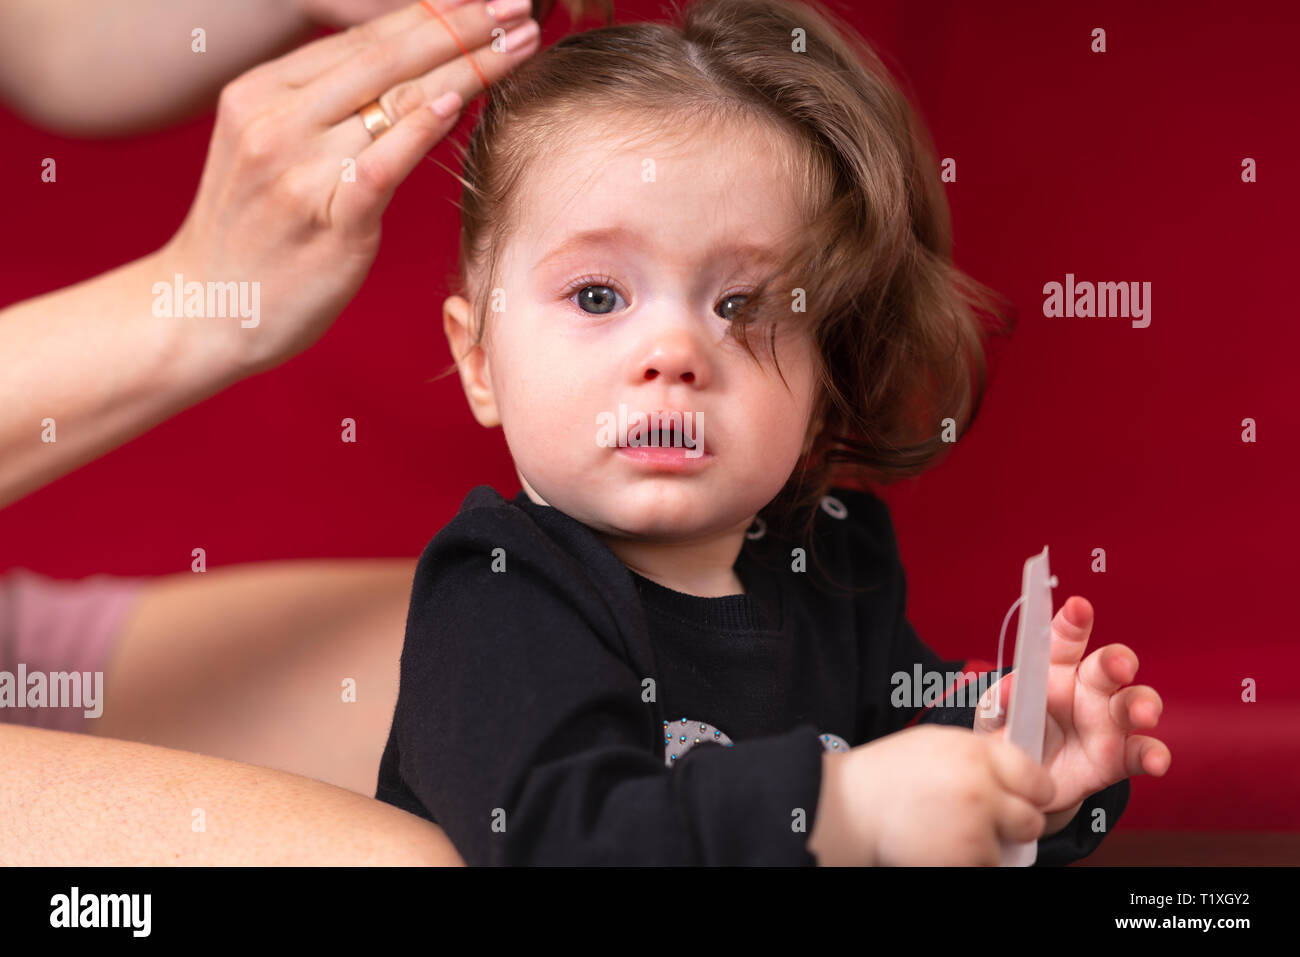 Woman hands braiding young baby girls brown hair. Close-up child portrait against red background Stock Photo